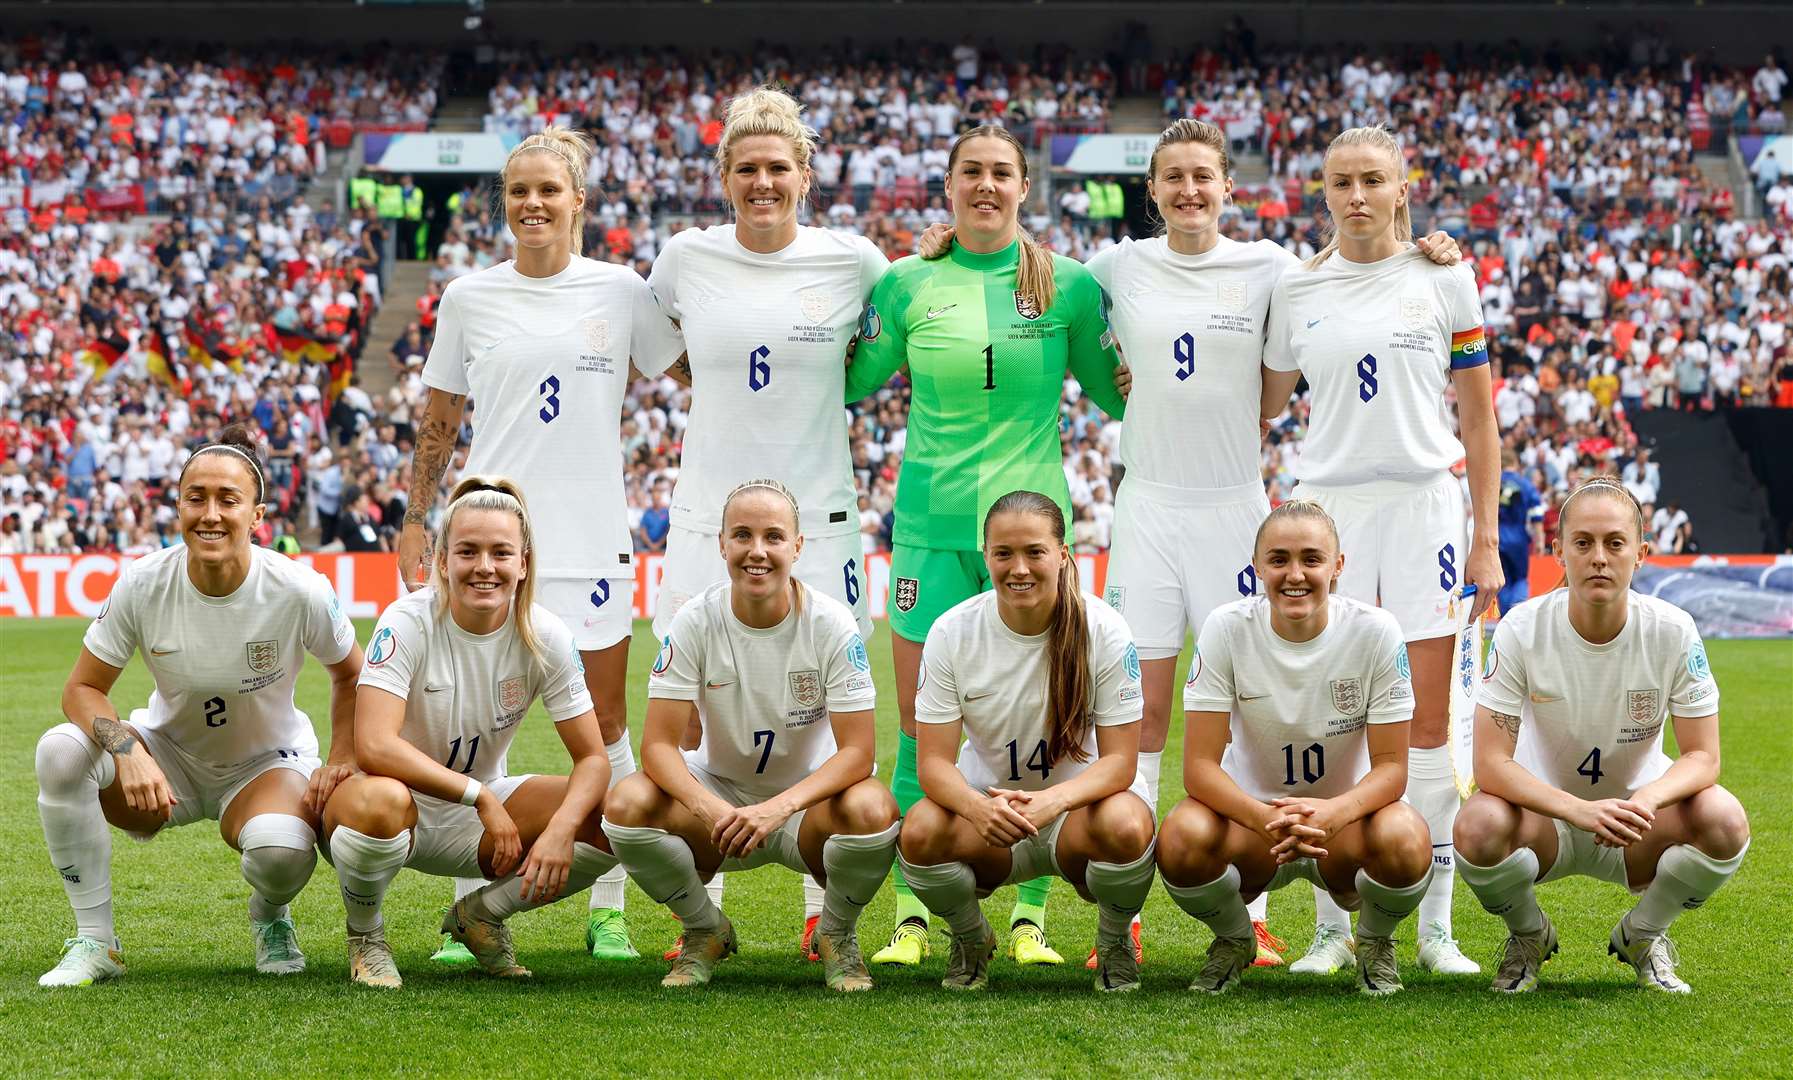 The Lionesses, England's women's football team, have won the hearts of the country